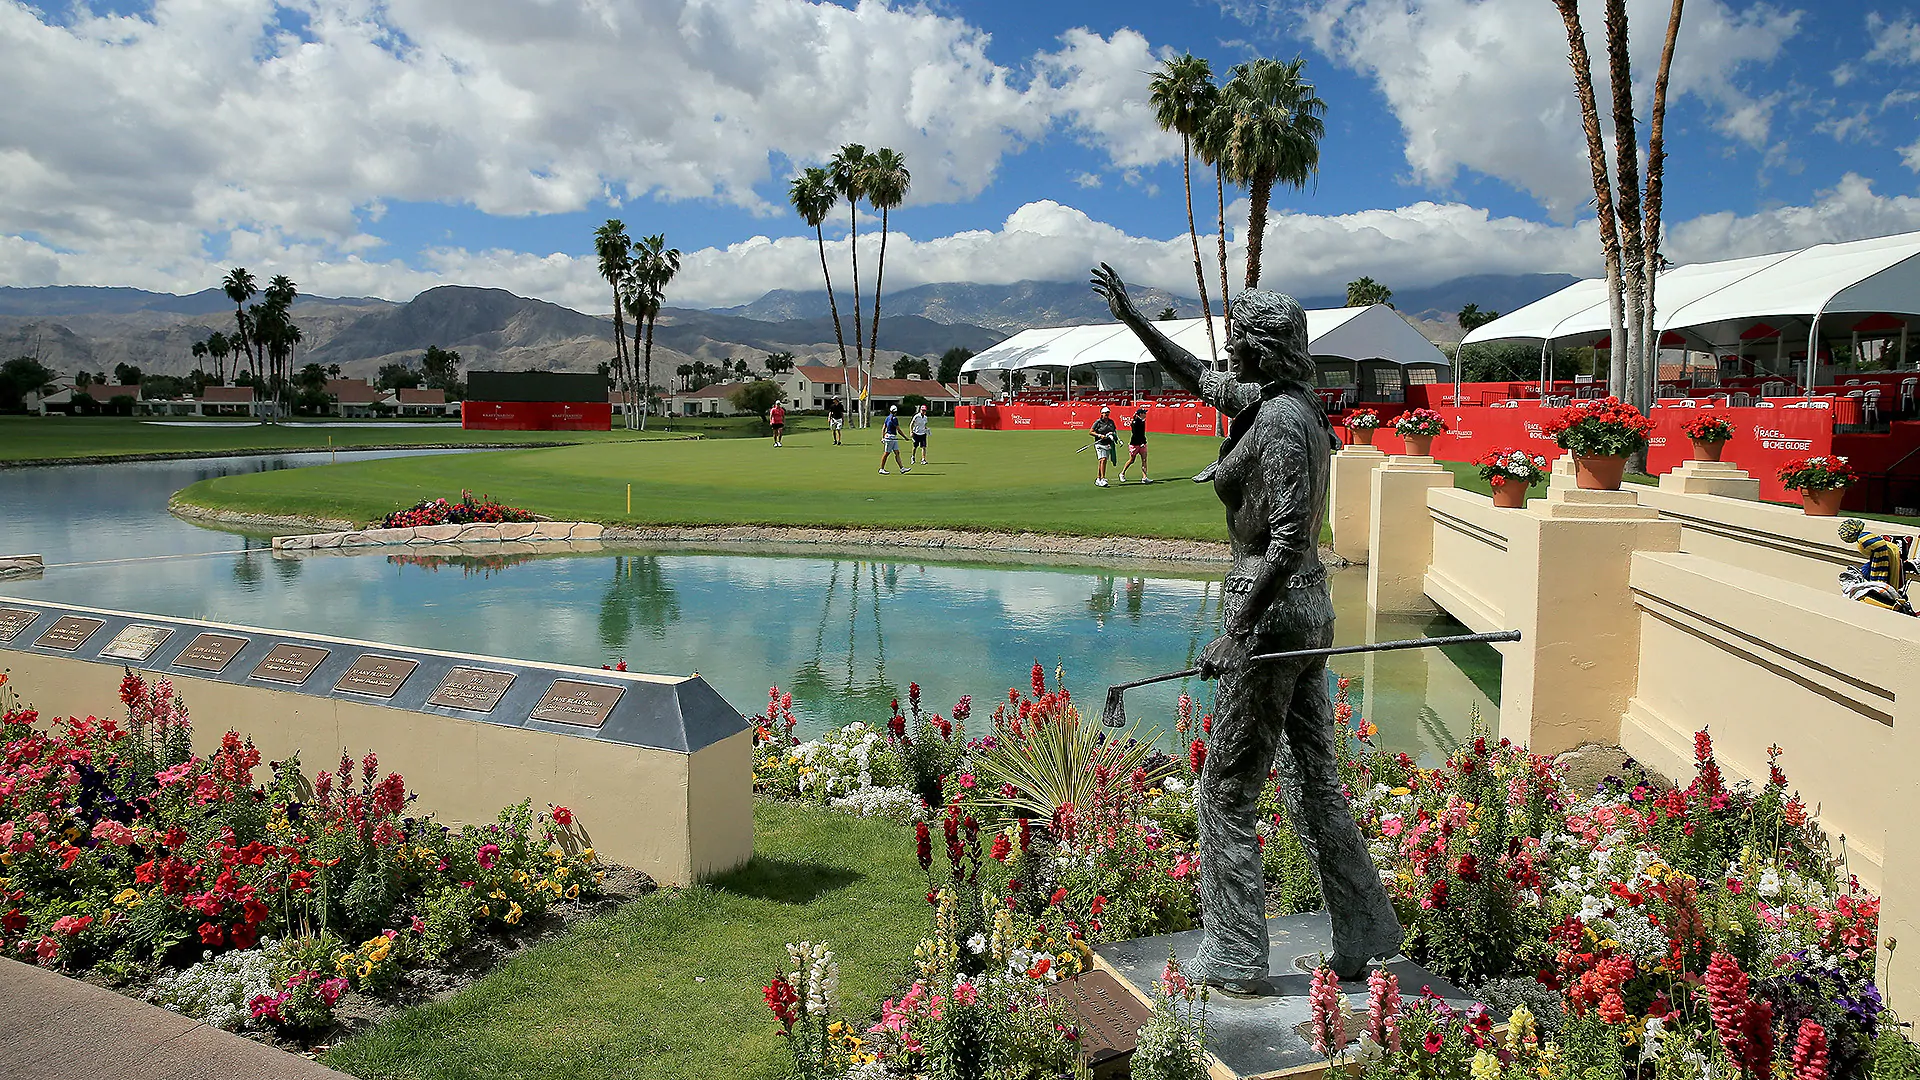 Dinah Shore and the legacy of Poppie's Pond leap